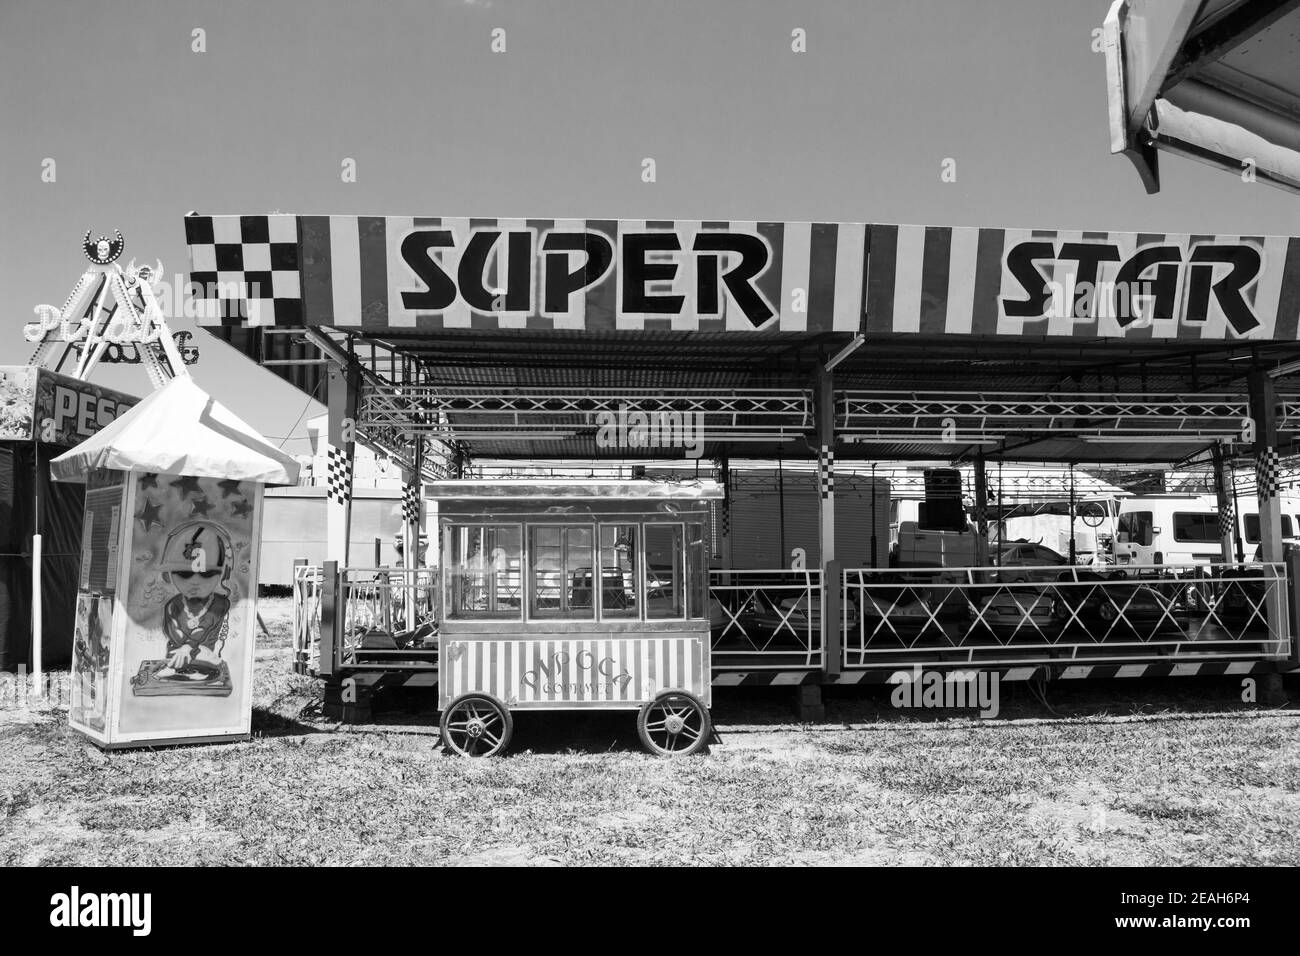 Ibitinga, SP, Brazil - 02 07 2021: A vintage popcorn cart in front of a Bumper Cars Ride at an empty Amusement Park Stock Photo